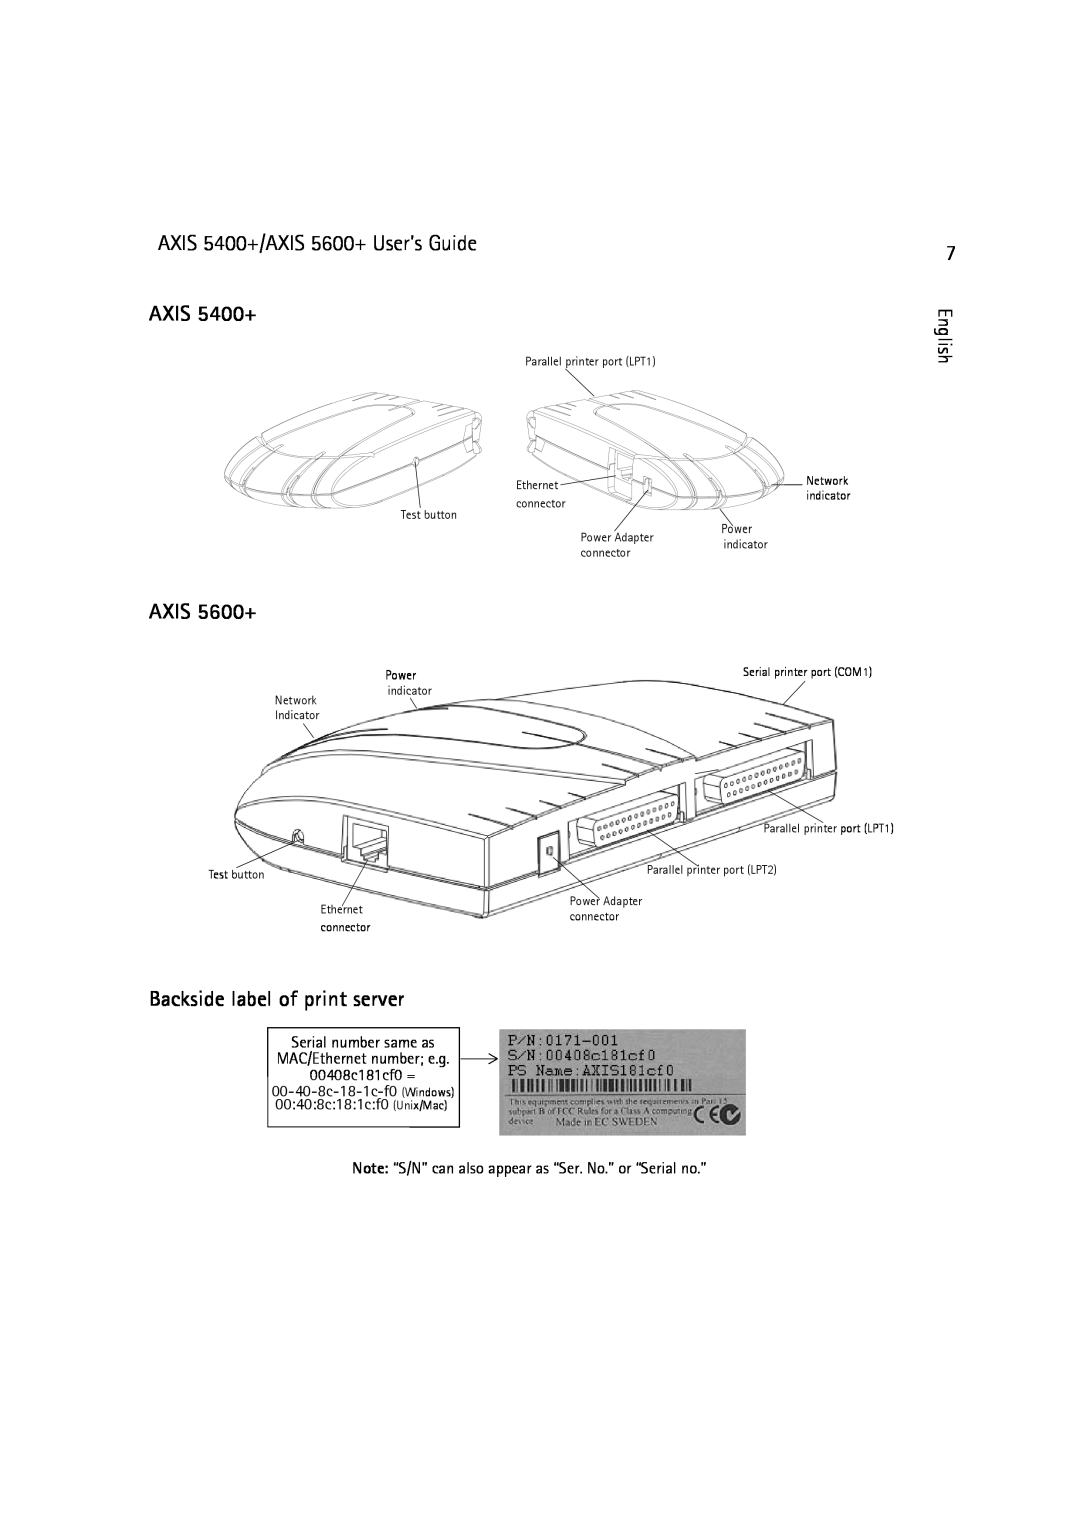 Dell manual Backside label of print server, AXIS 5400+/AXIS 5600+ User’s Guide, 00408c181cf0 =, Power 